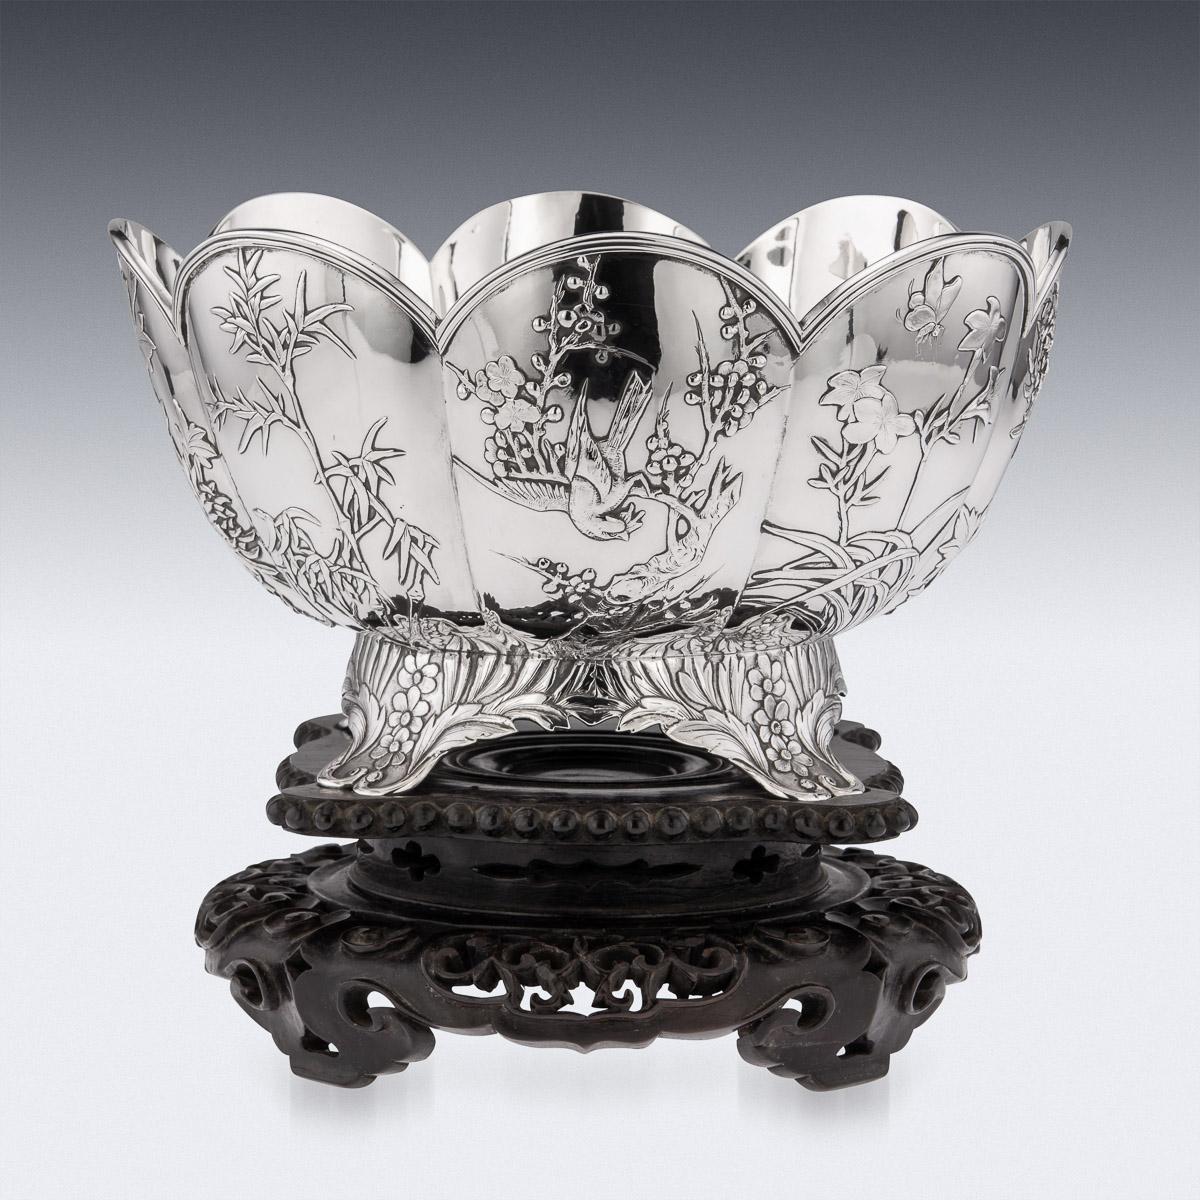 19th century Chinese solid silver decorative fruit bowl, of traditional round form, with a shaped arched rim, standing on four spreading feet, with floral decoration along the bottom. The decoration is crisp and detailed, decorated with a continuous